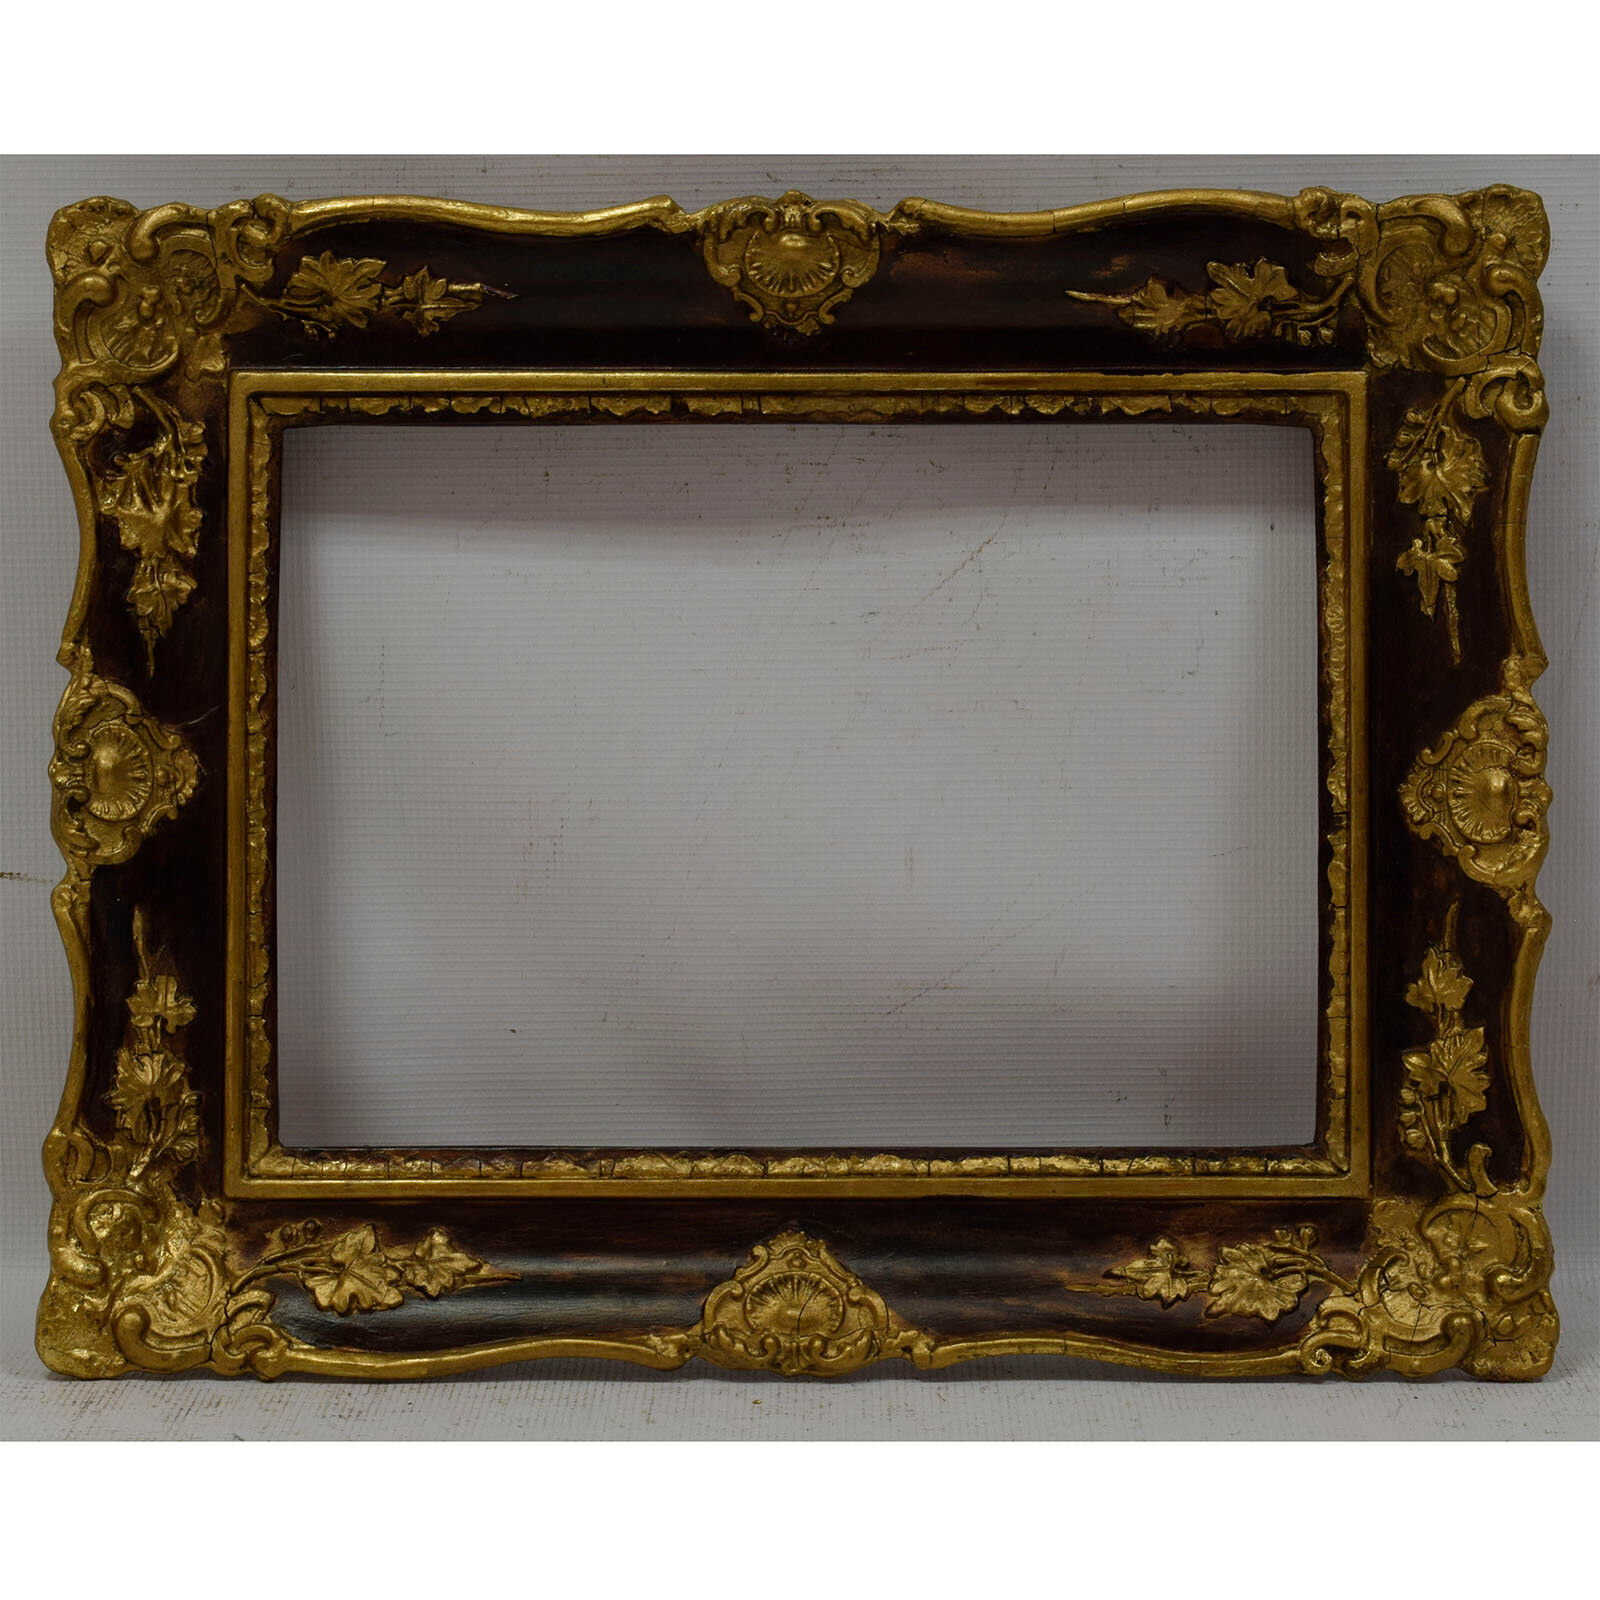 Ca.1900 Old wooden frame decorative corners Internal: 14.7x10.6 in